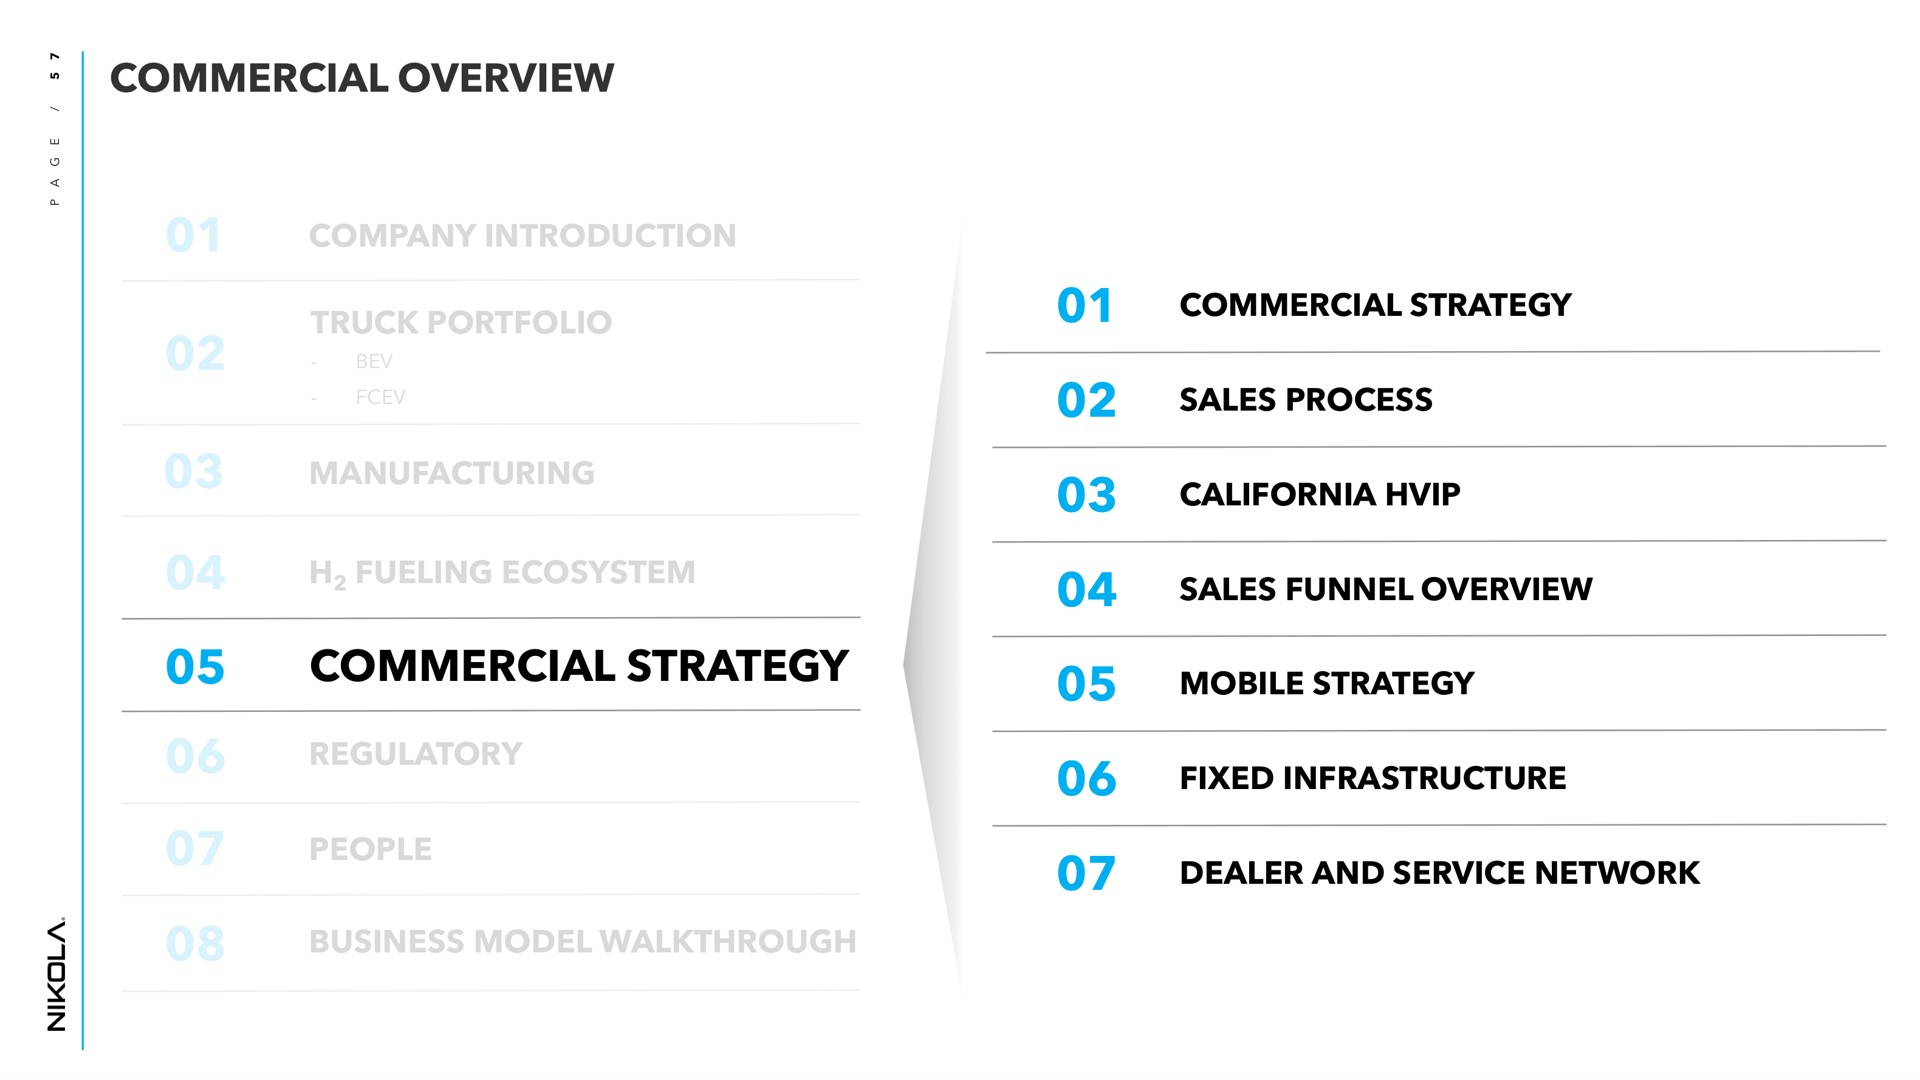 commercial overview company introduction truck portfolio manufacturing fueling ecosystem commercial strategy regulatory people business model commercial strategy sales process sales funnel overview mobile strategy fixed infrastructure dealer and service network | Nikola